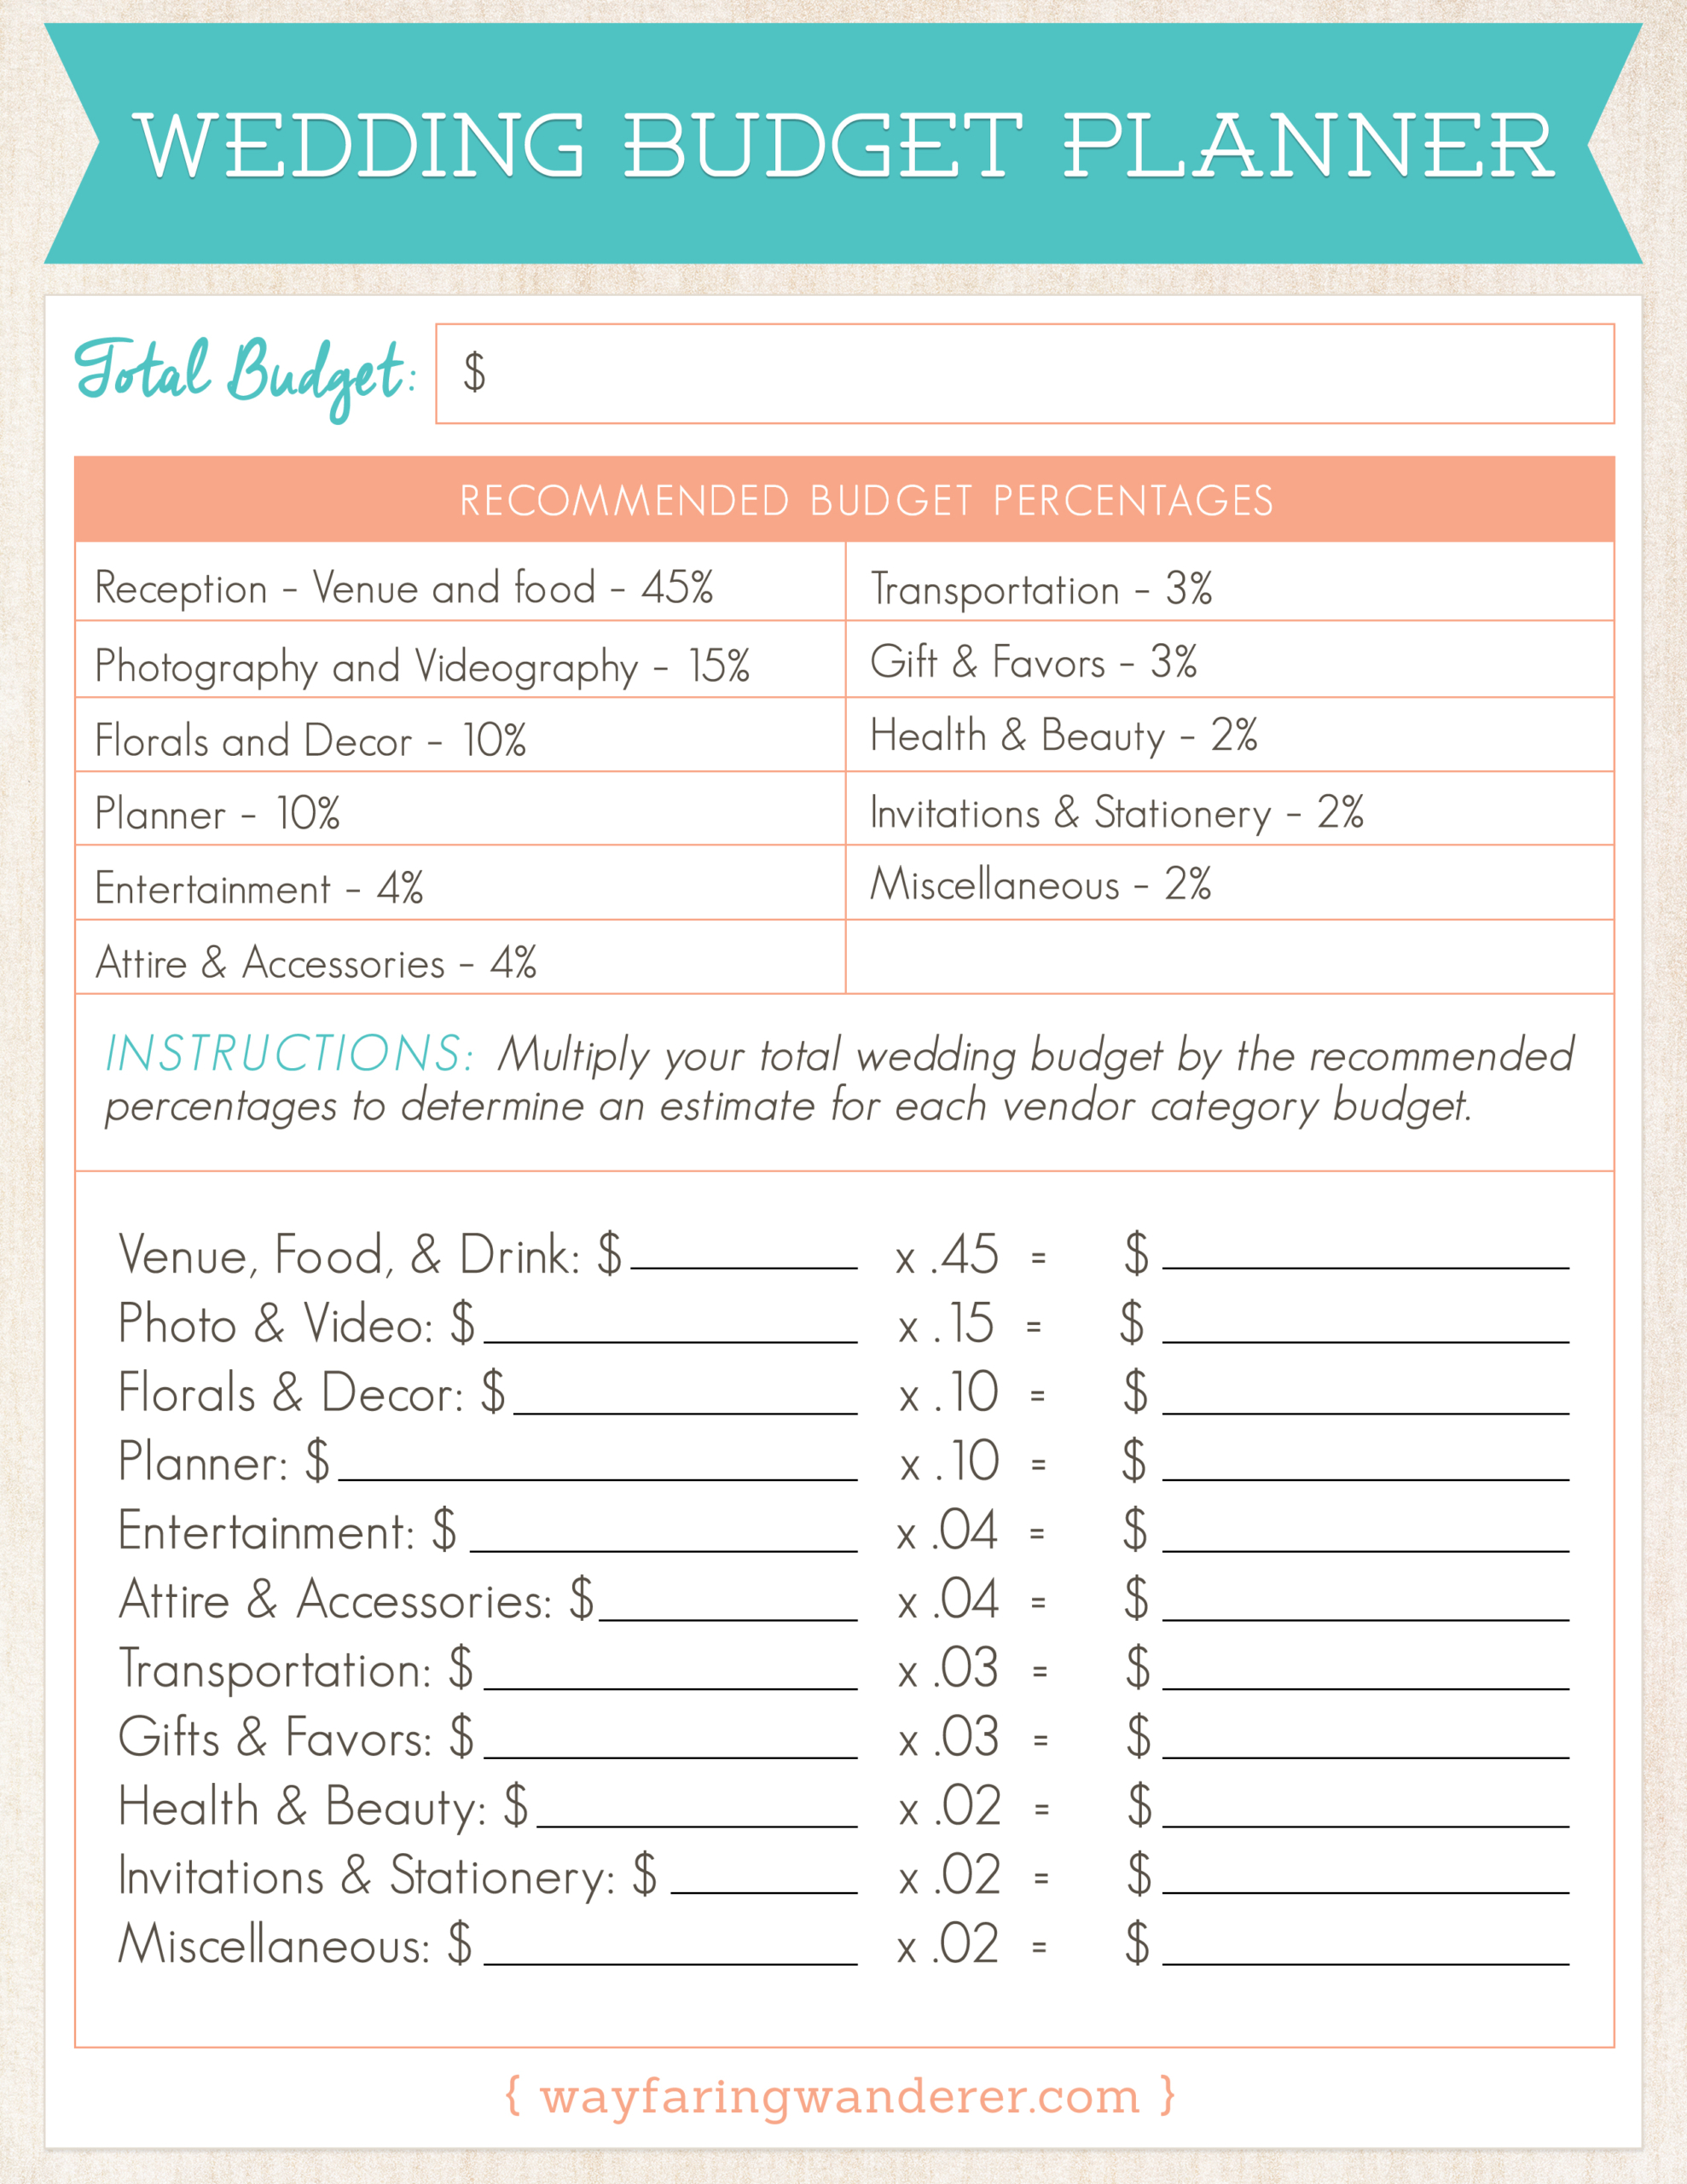 How to Create A Wedding Budget That Works for You